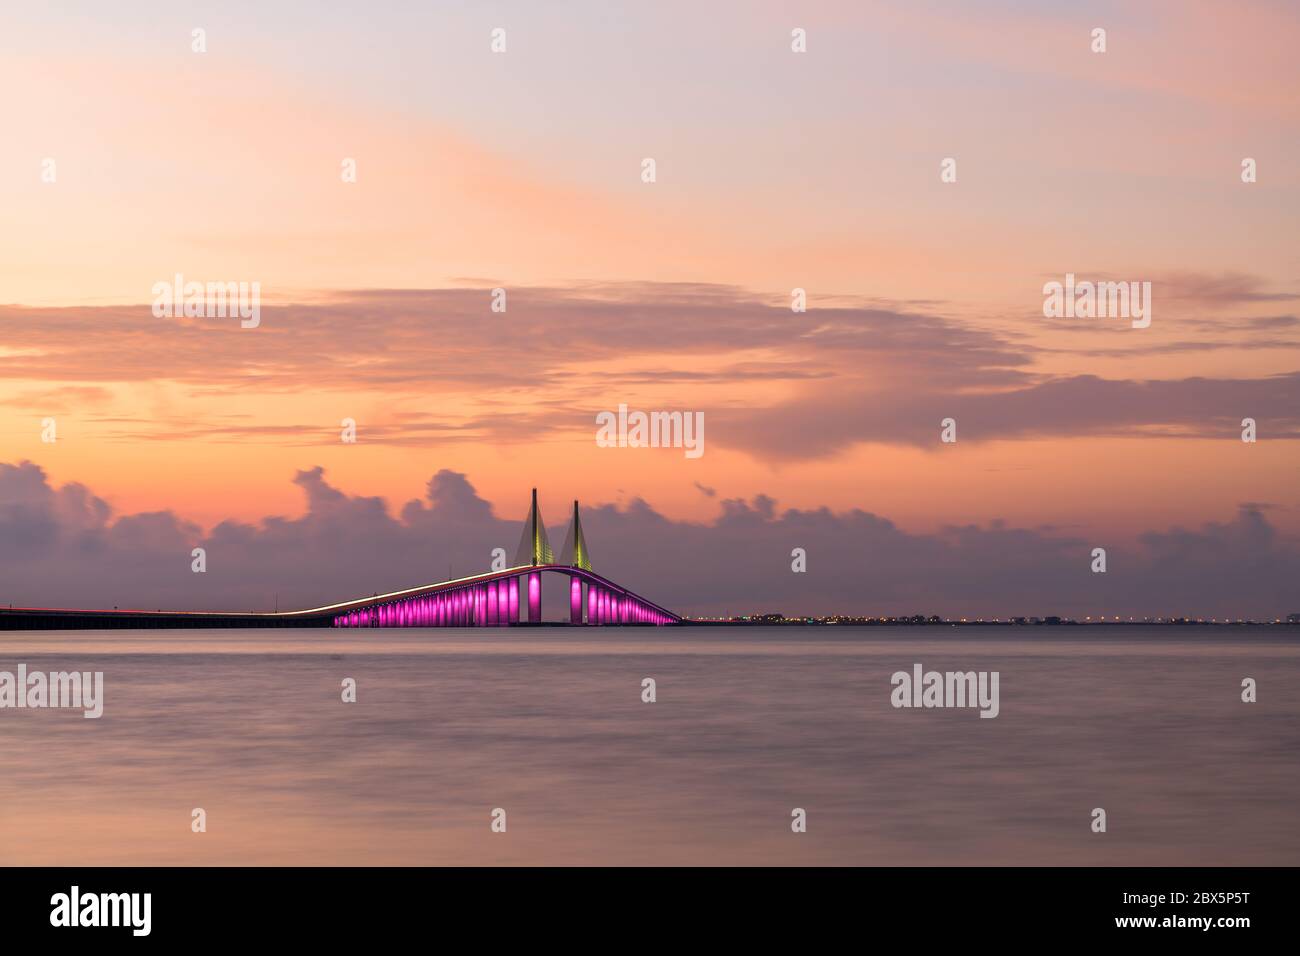 Sunshine Skyway Bridge spanning the Lower Tampa Bay and connecting Terra Ceia to St. Petersburg, Florida, USA. Stock Photo